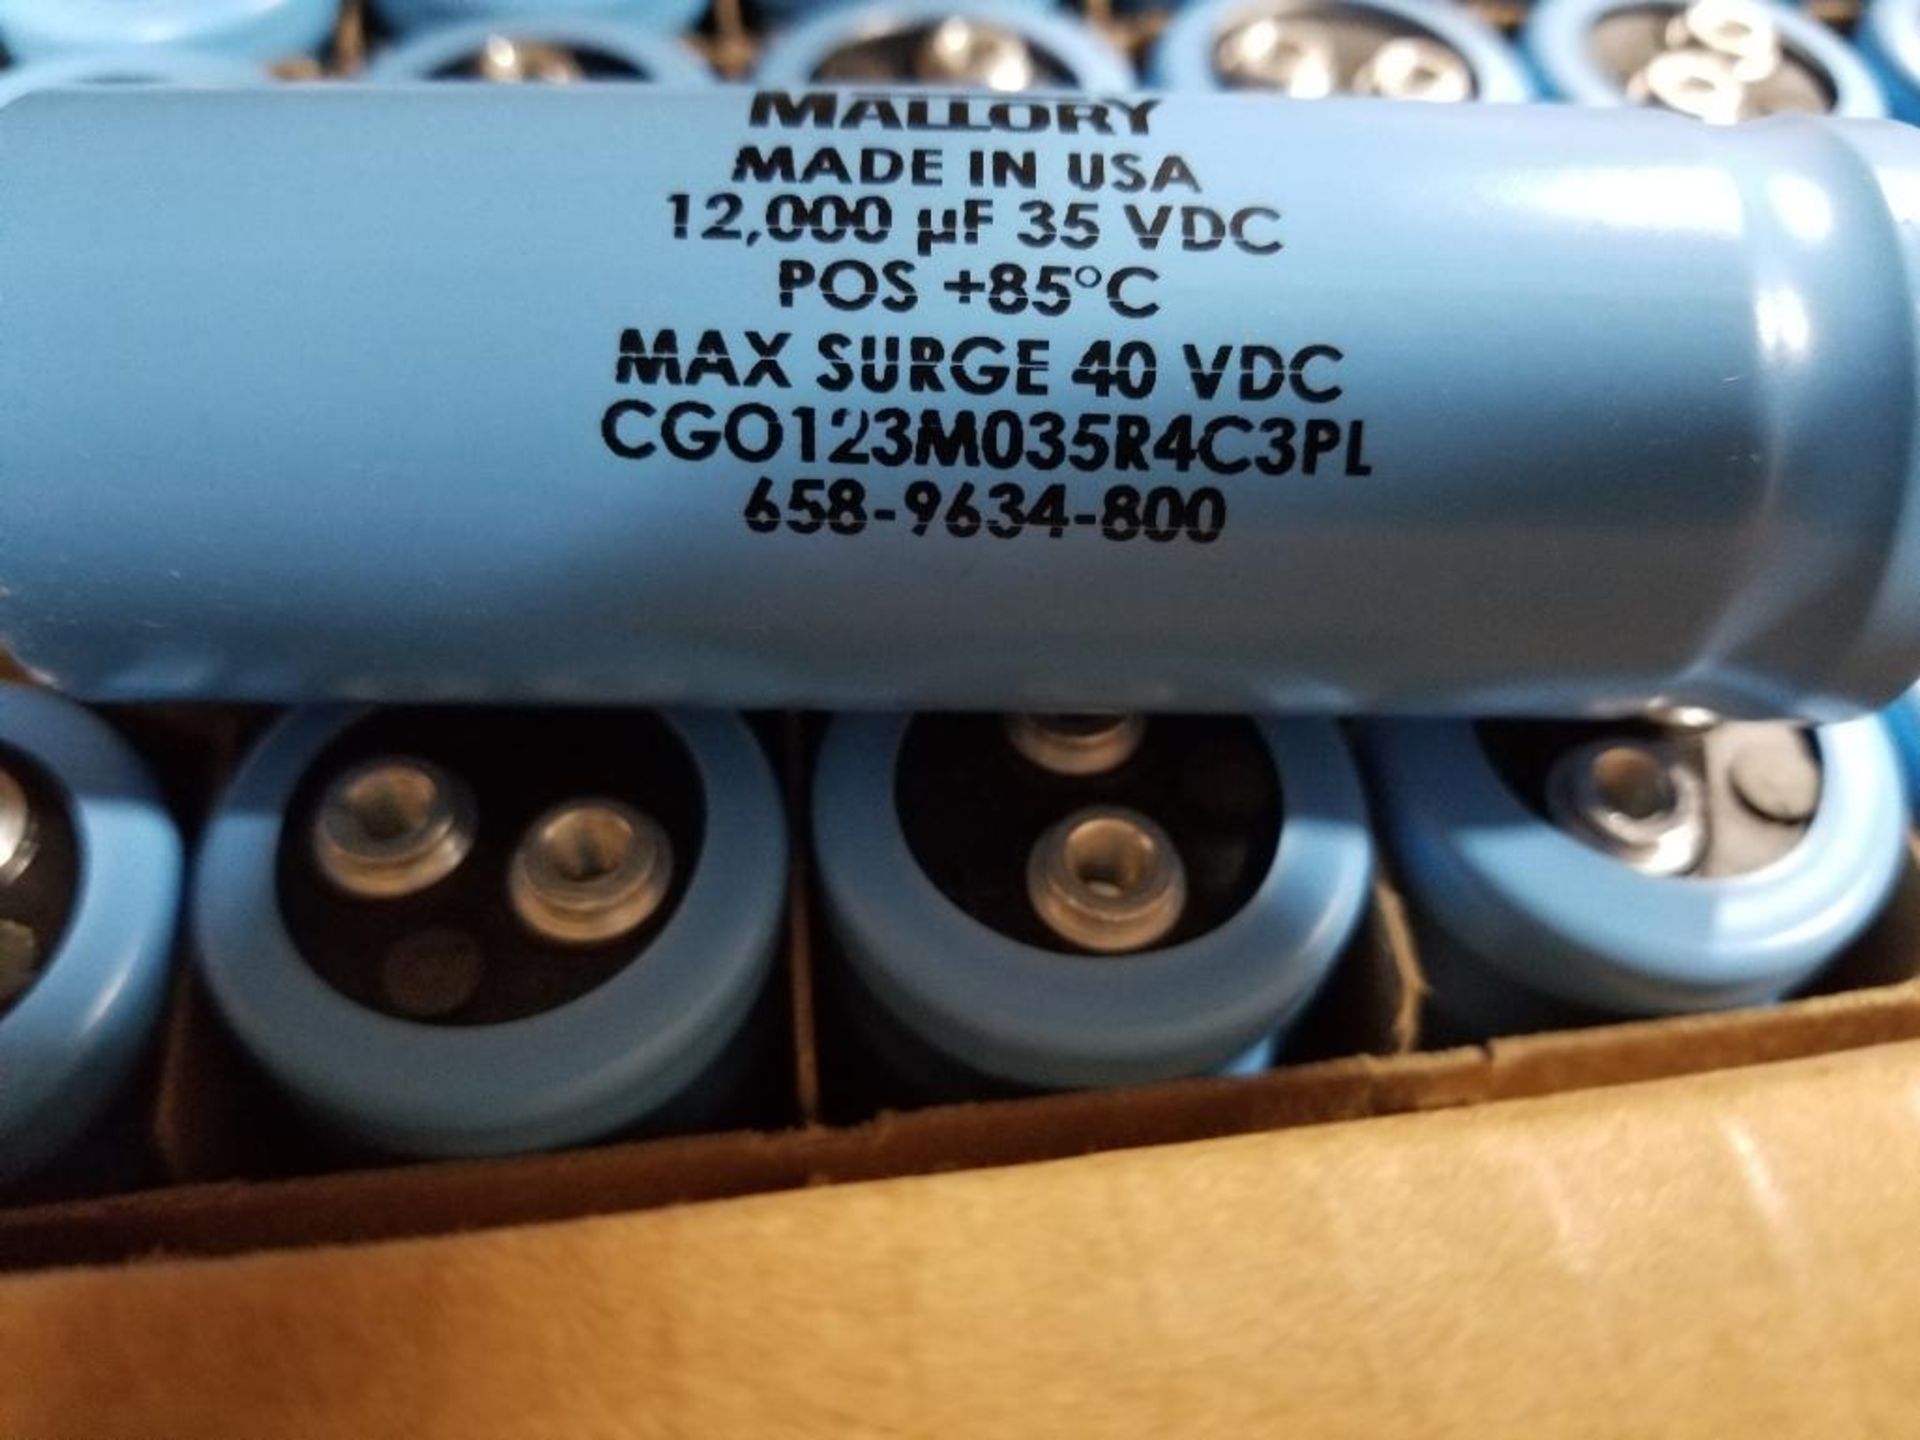 Qty 144 - Mallory capacitor. Part number CGO123M035R4C3PL. - Image 4 of 5